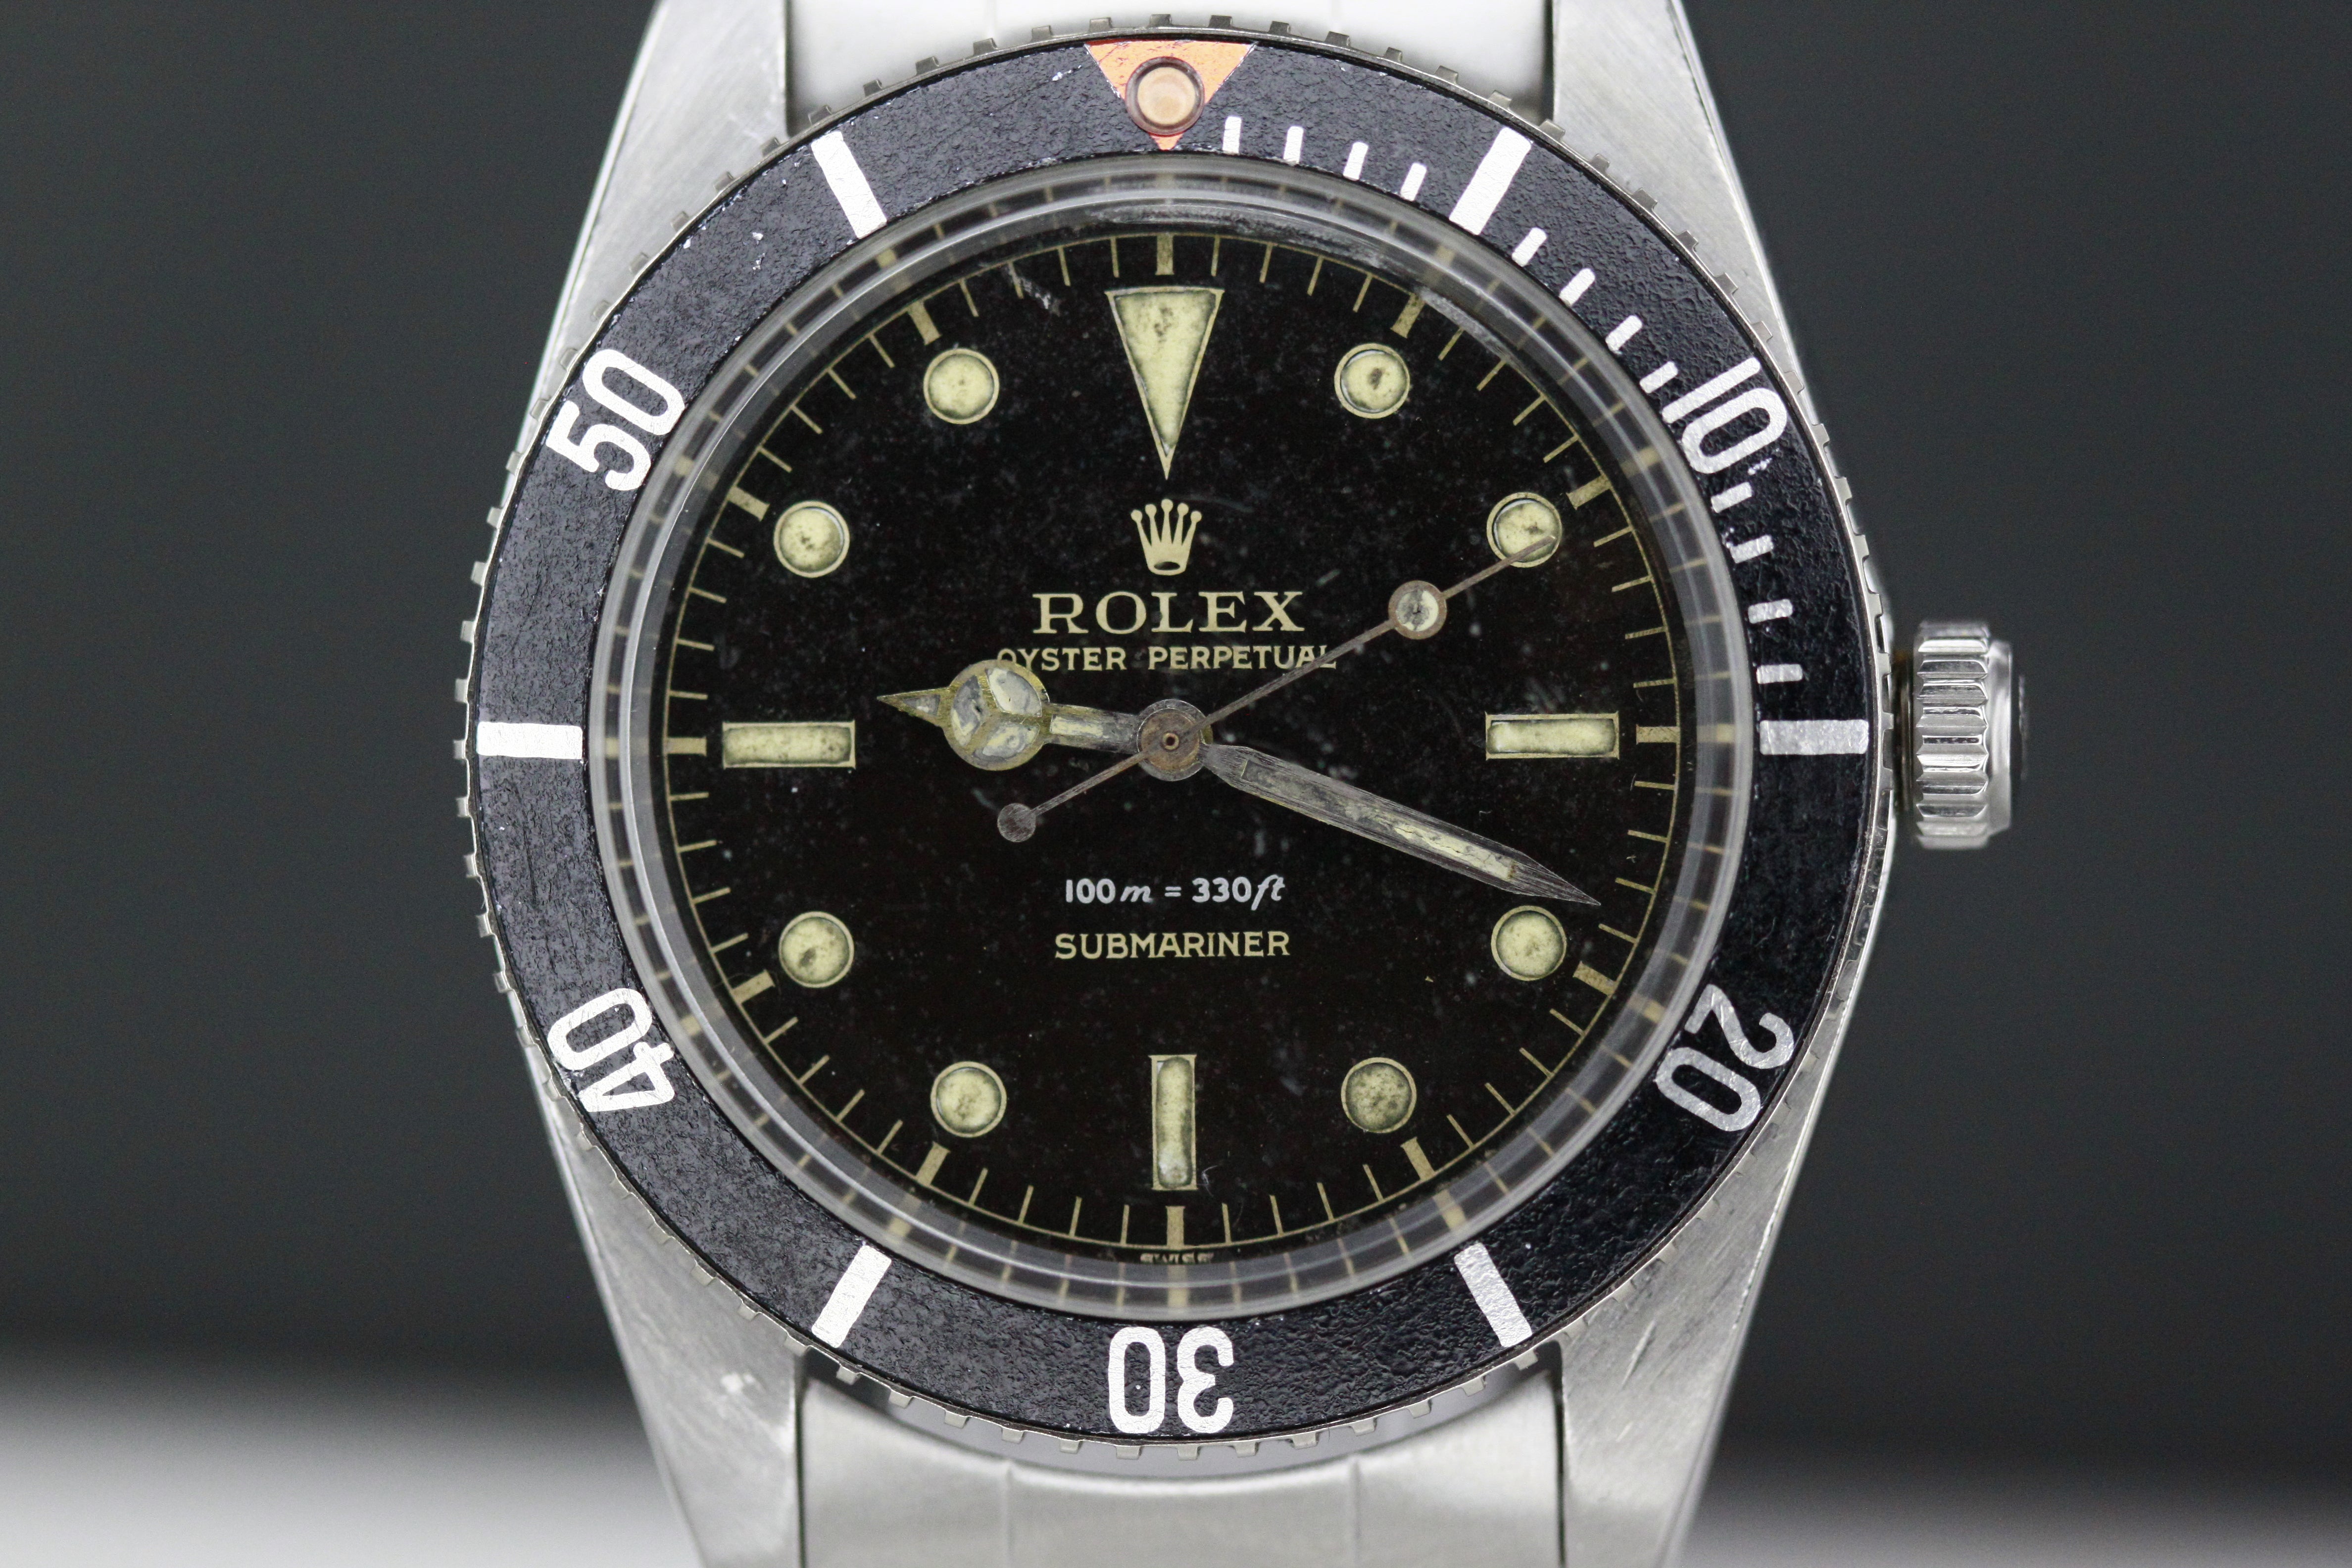 Rolex Oyster Perpetual Submariner Ref.5508 Small Crown from 1958